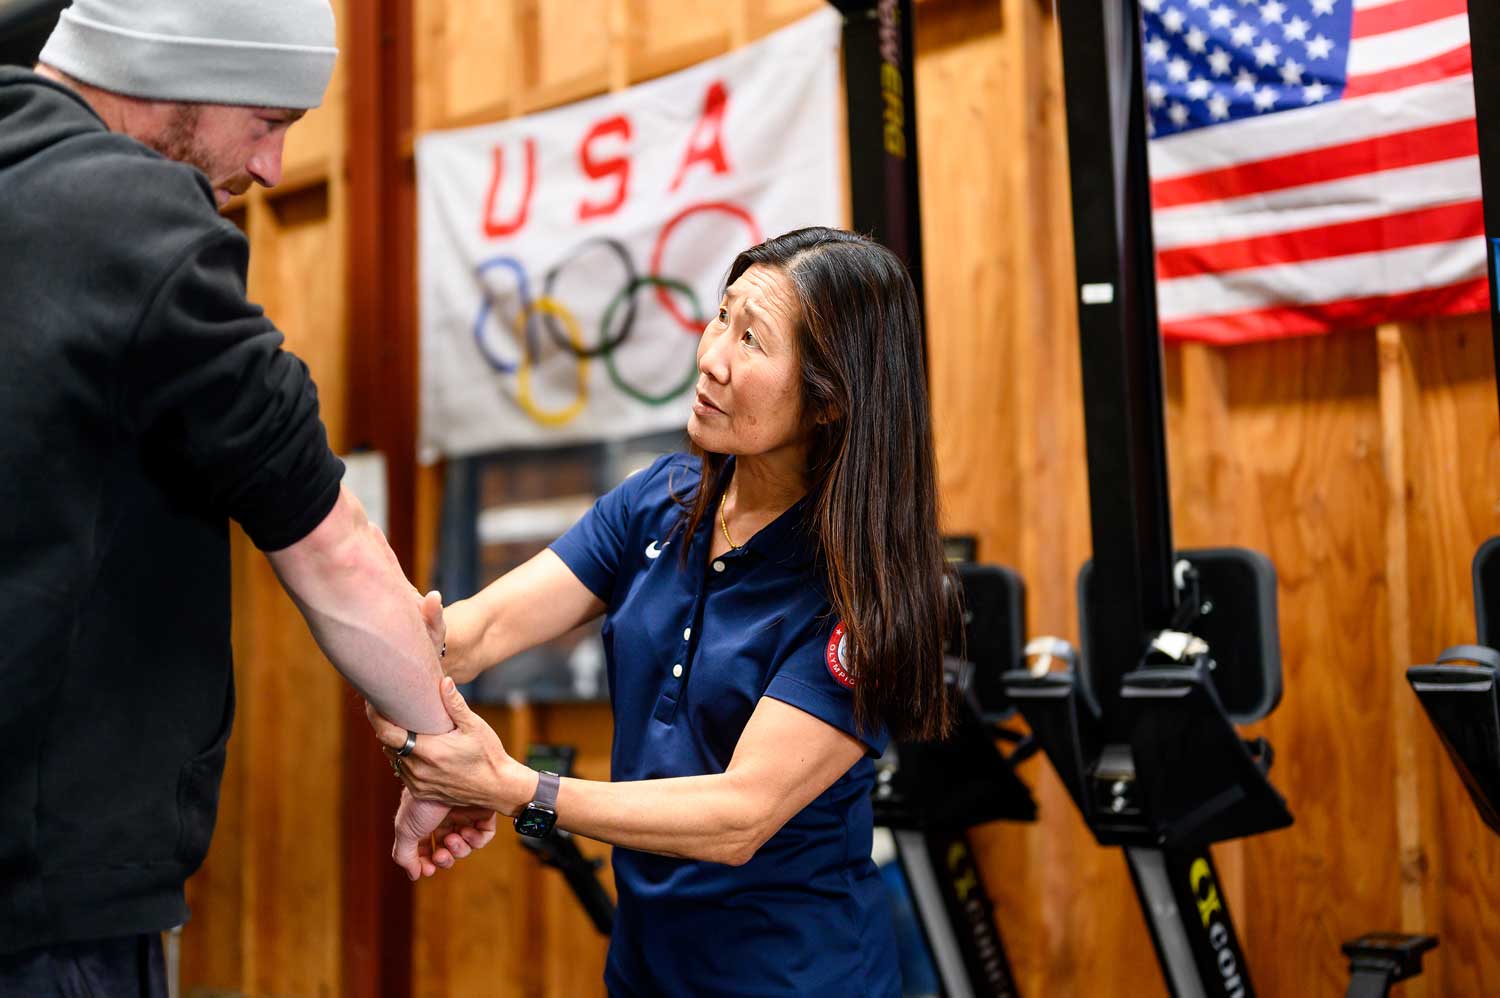 Ben Davison, left, receives physical therapy on his arm from Dr. Cindy Chang, right. On a wall in the background are an American flag and a Team USA Olympic flag.